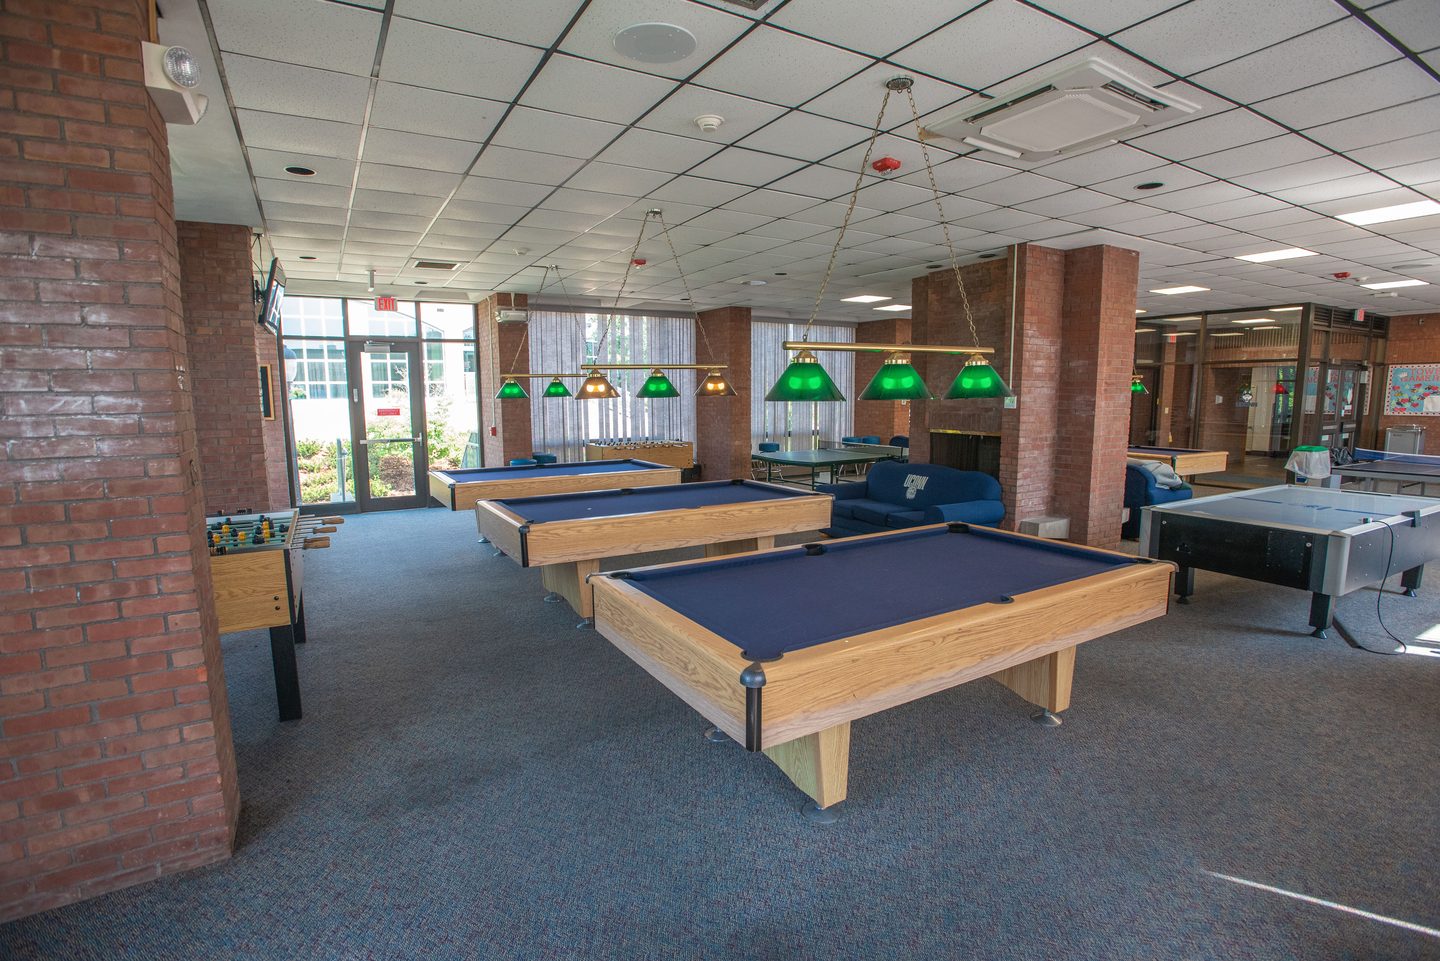 Residential Life game room with foosball and pool tables